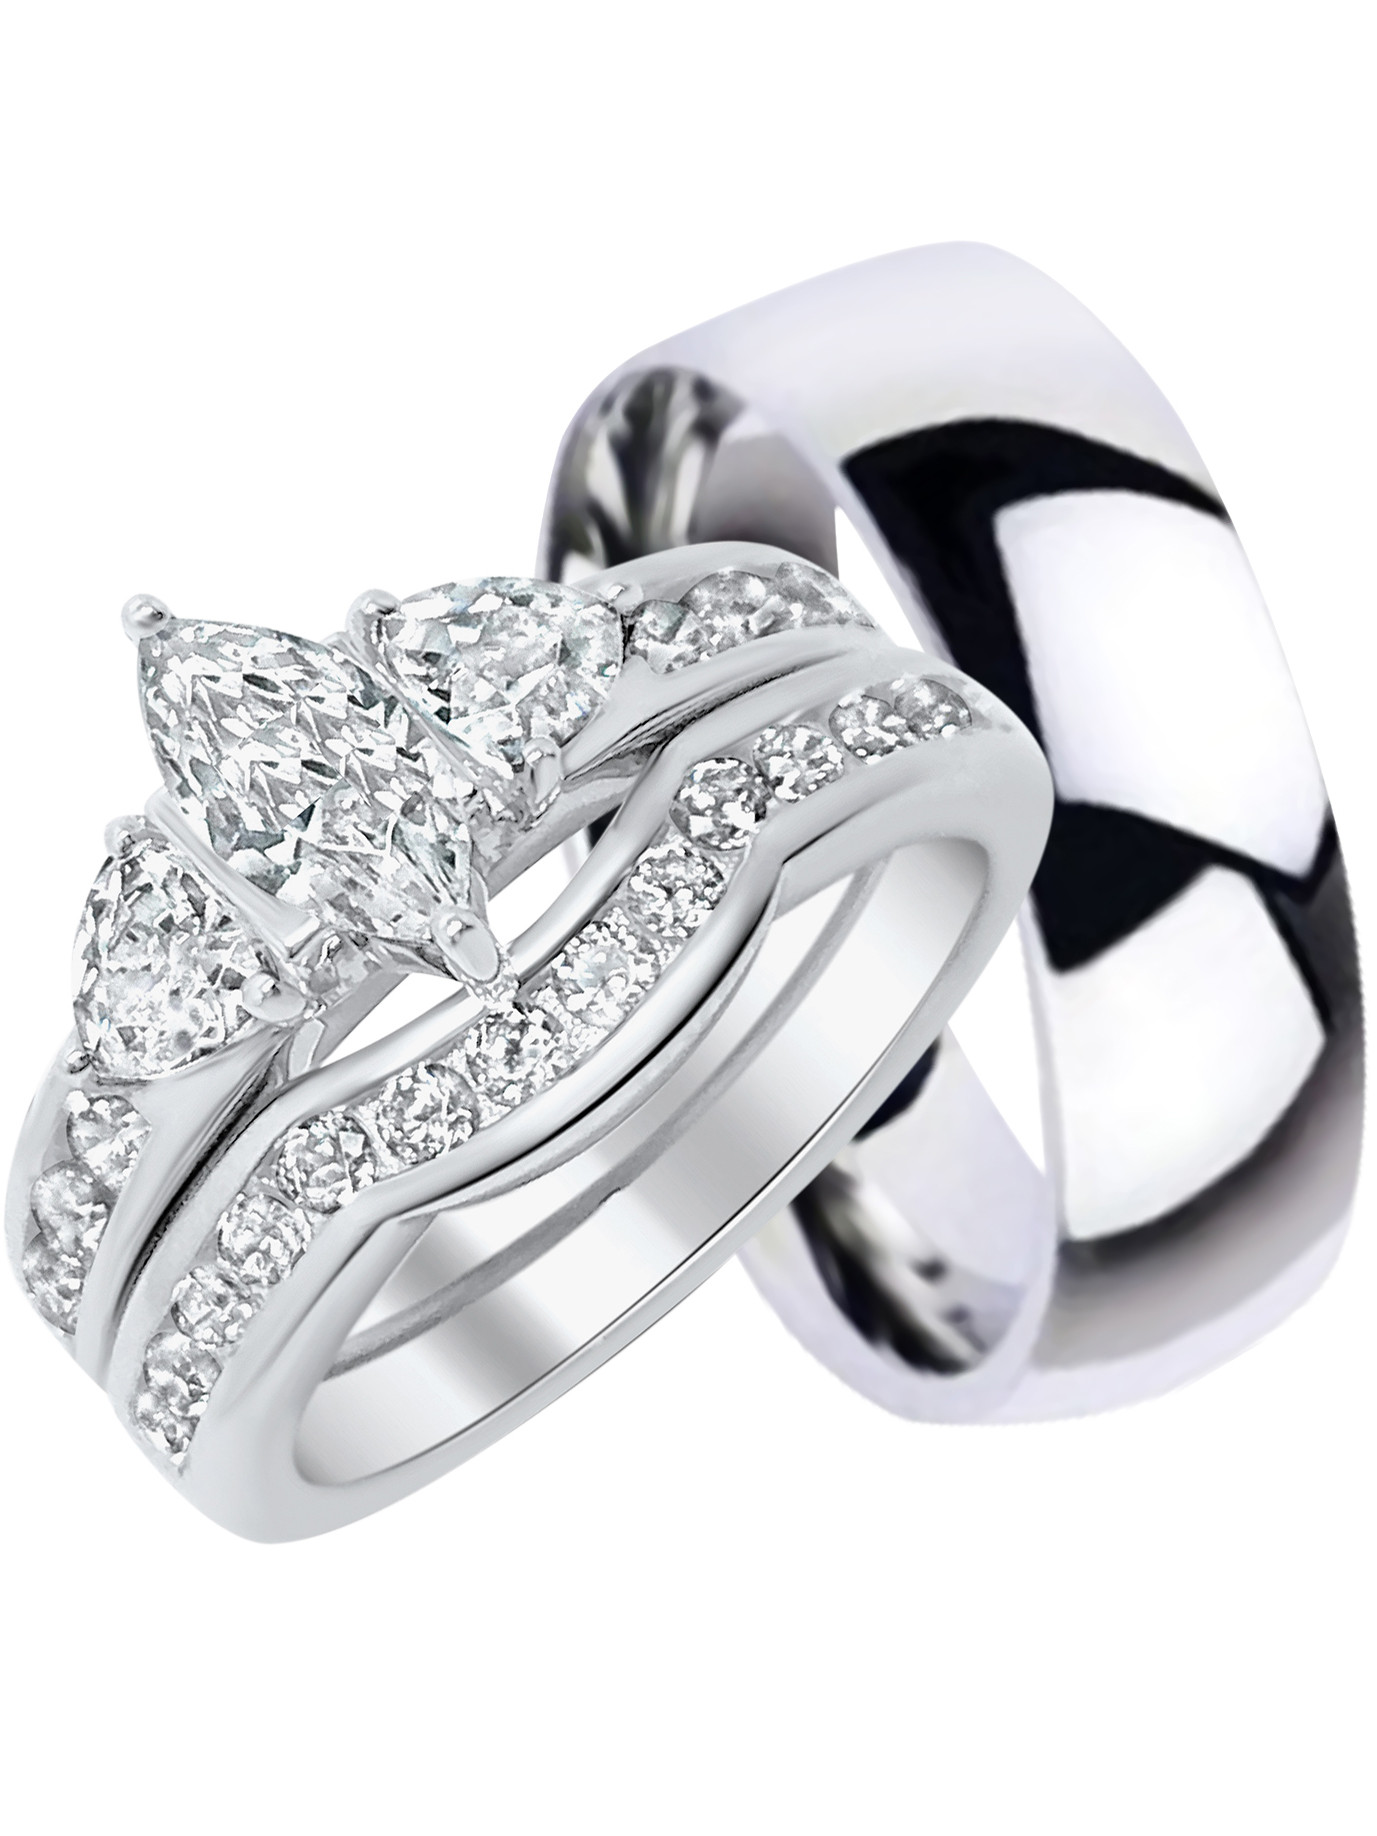 Silver Wedding Ring Sets For Him And Her
 His and Hers Wedding Ring Set Matching Trio Wedding Bands